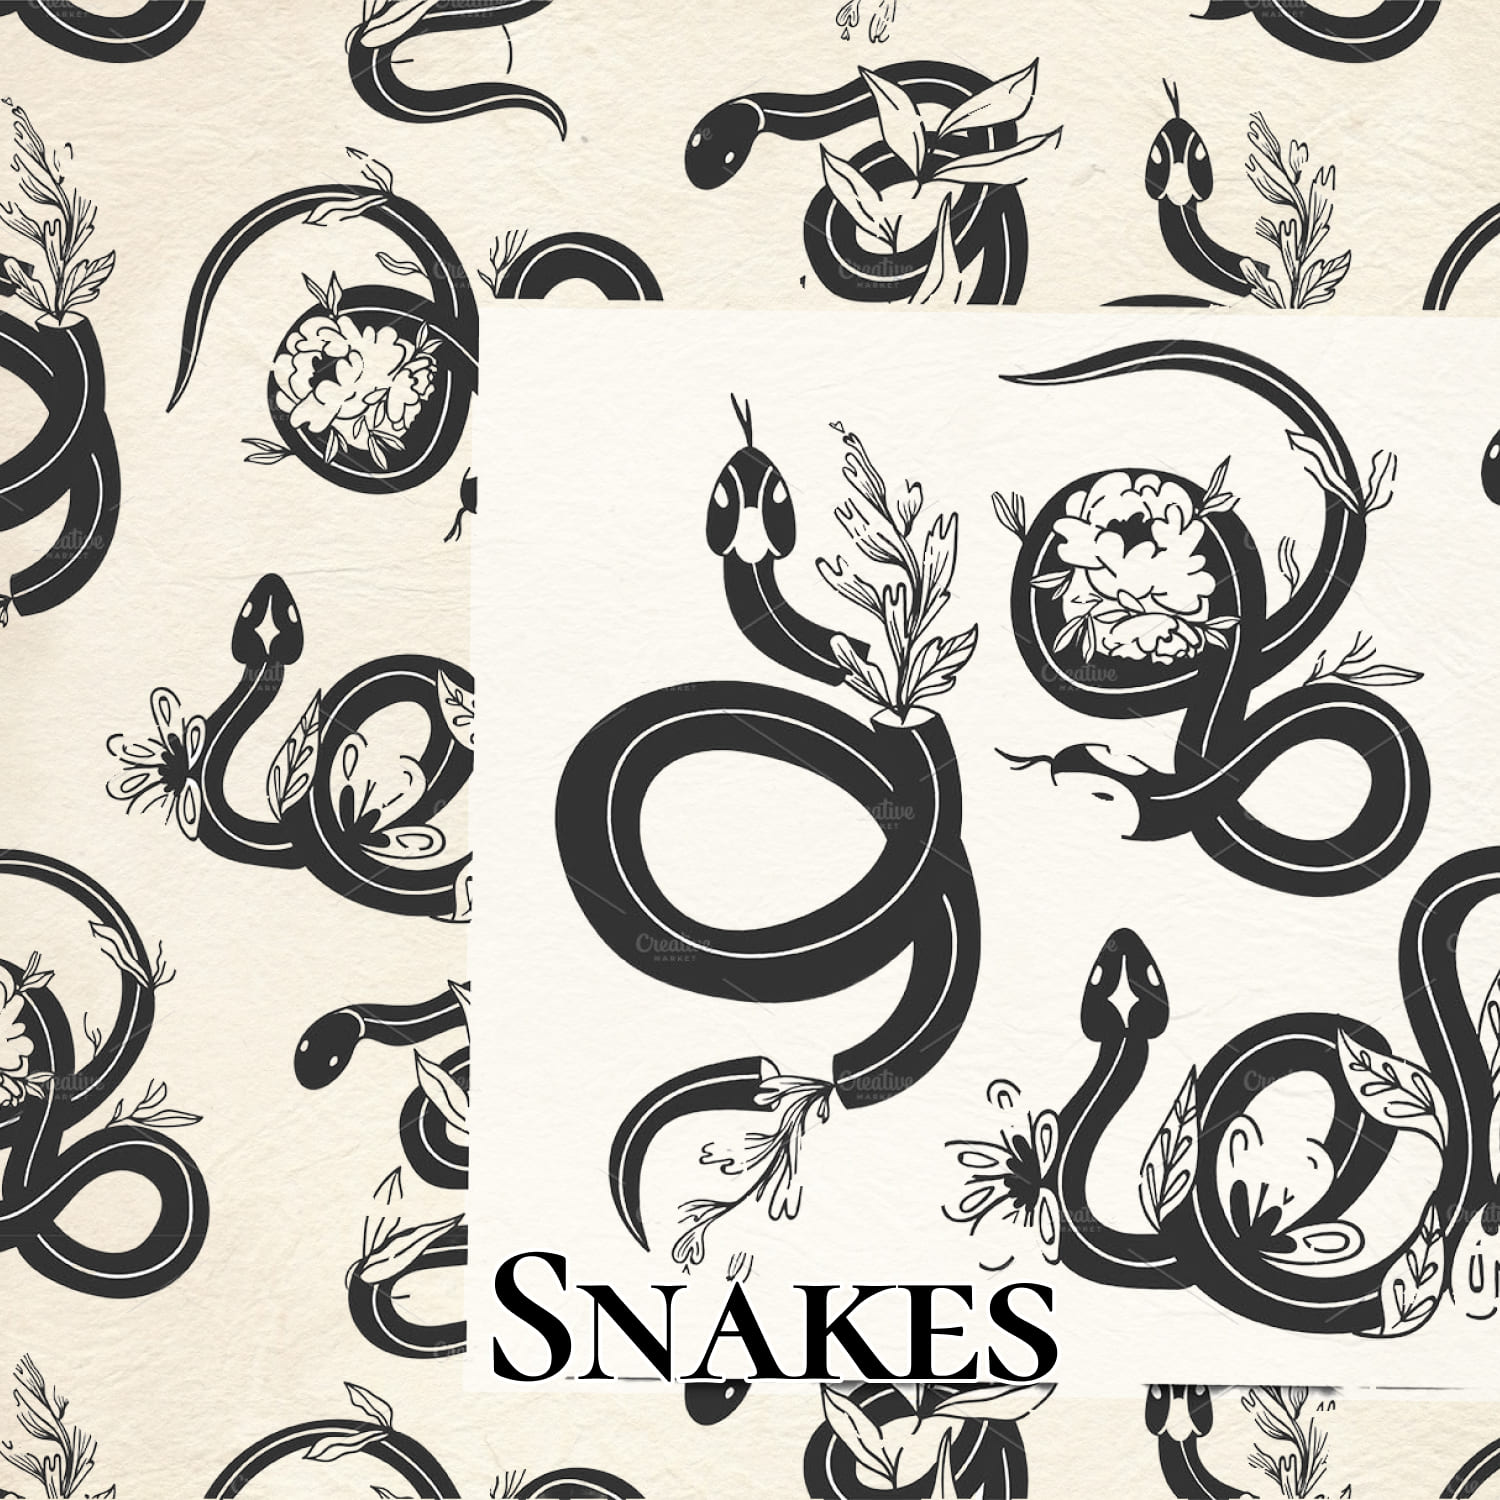 Snakes.